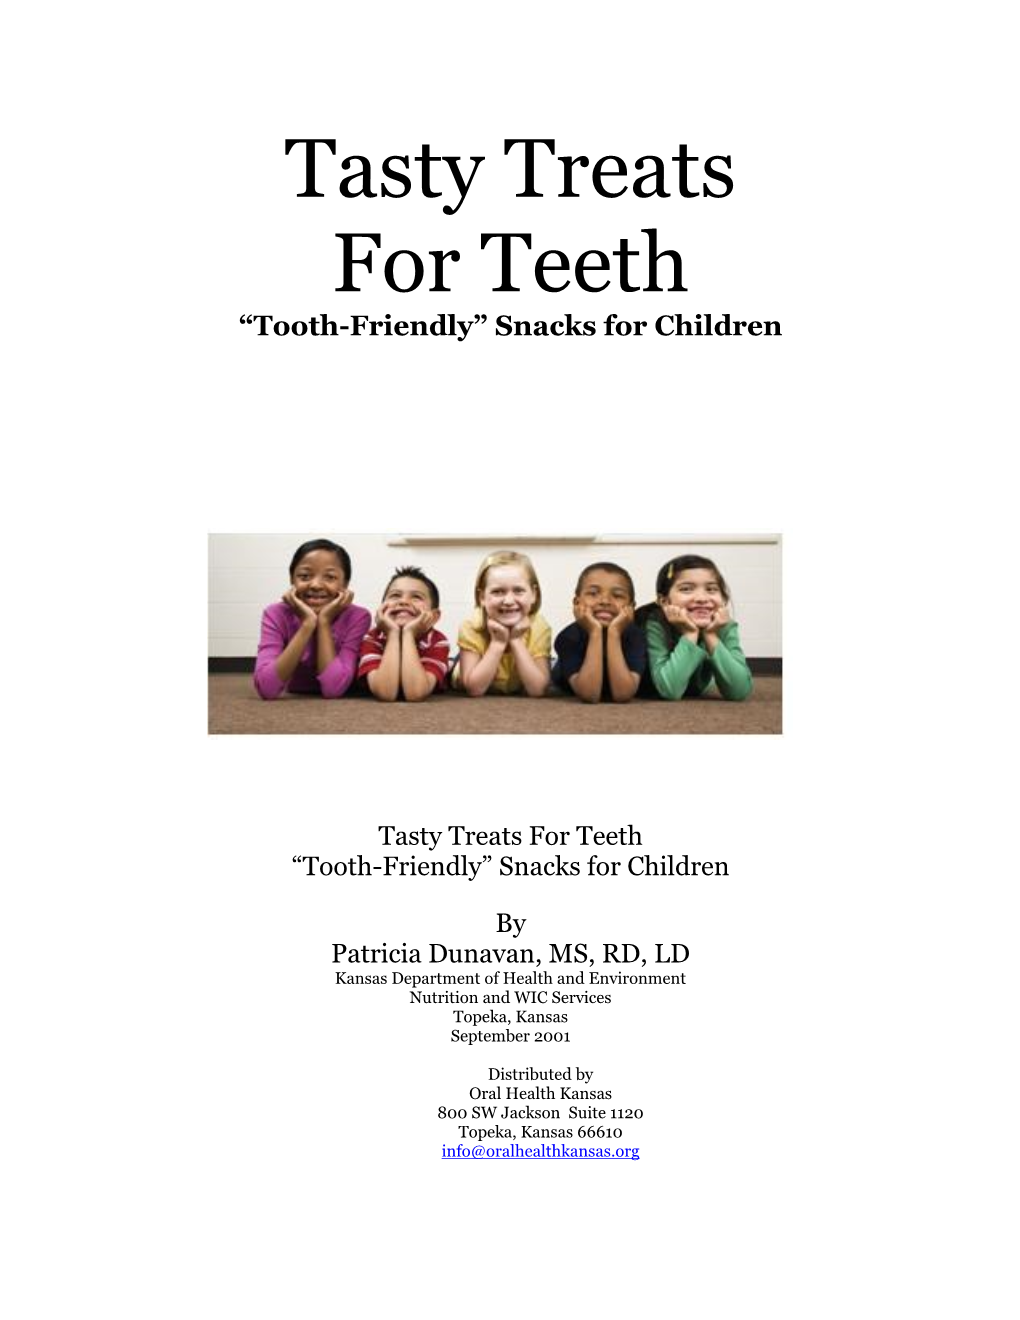 Tasty Treats for Teeth “Tooth-Friendly” Snacks for Children